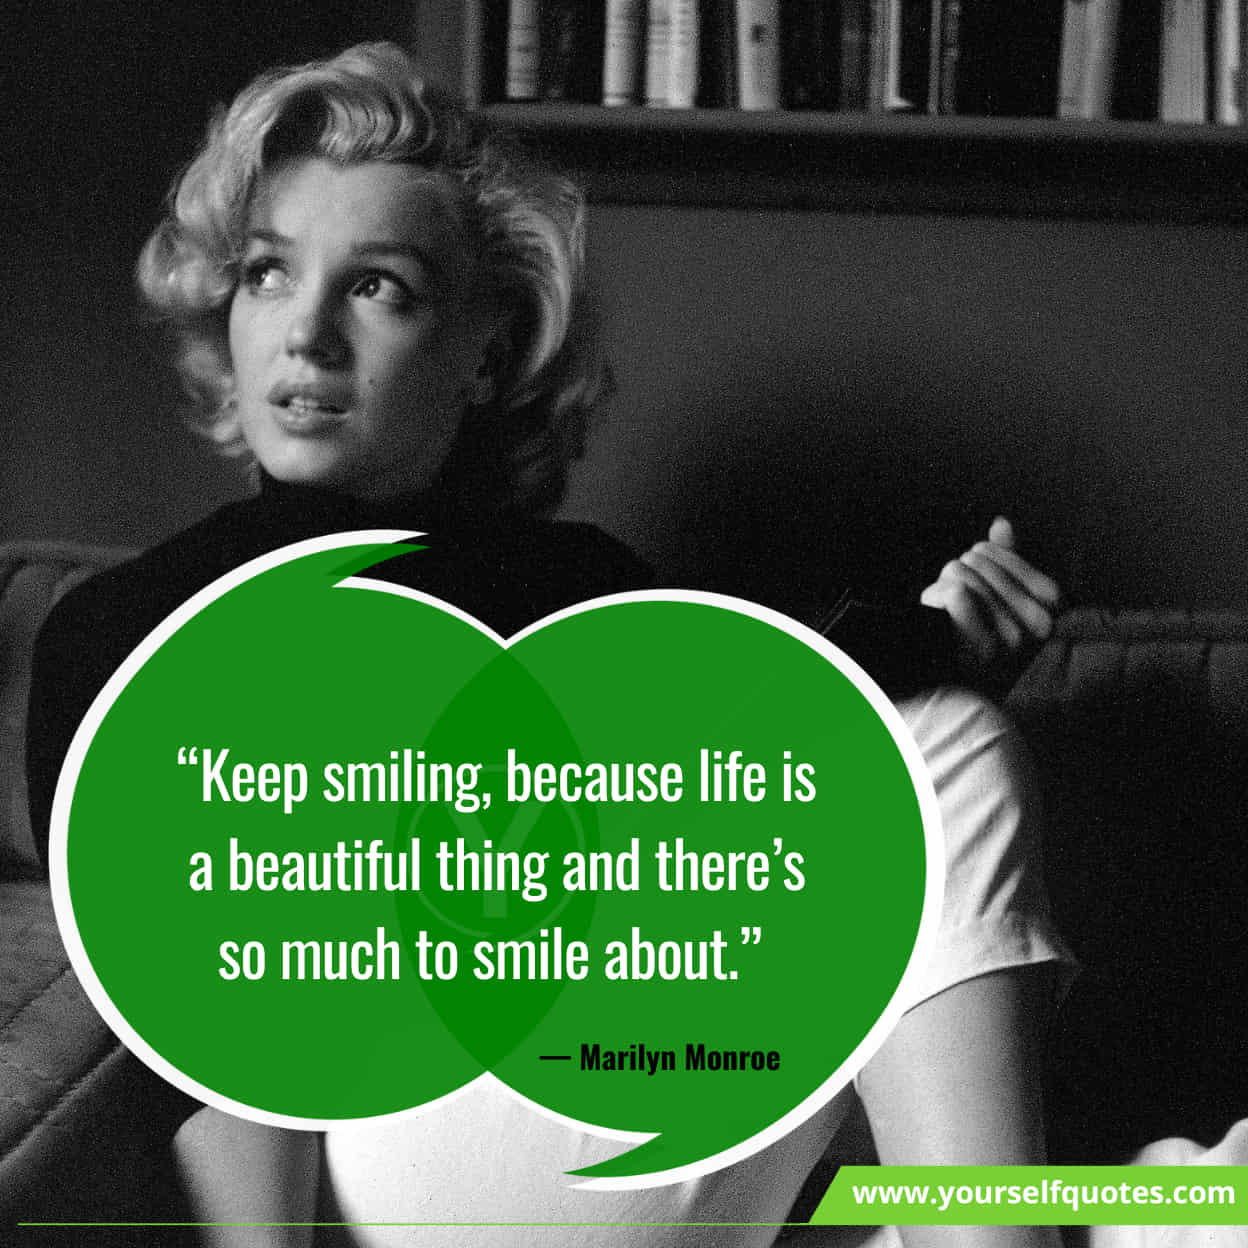 Inspirational Marilyn Monroe Best Quotes